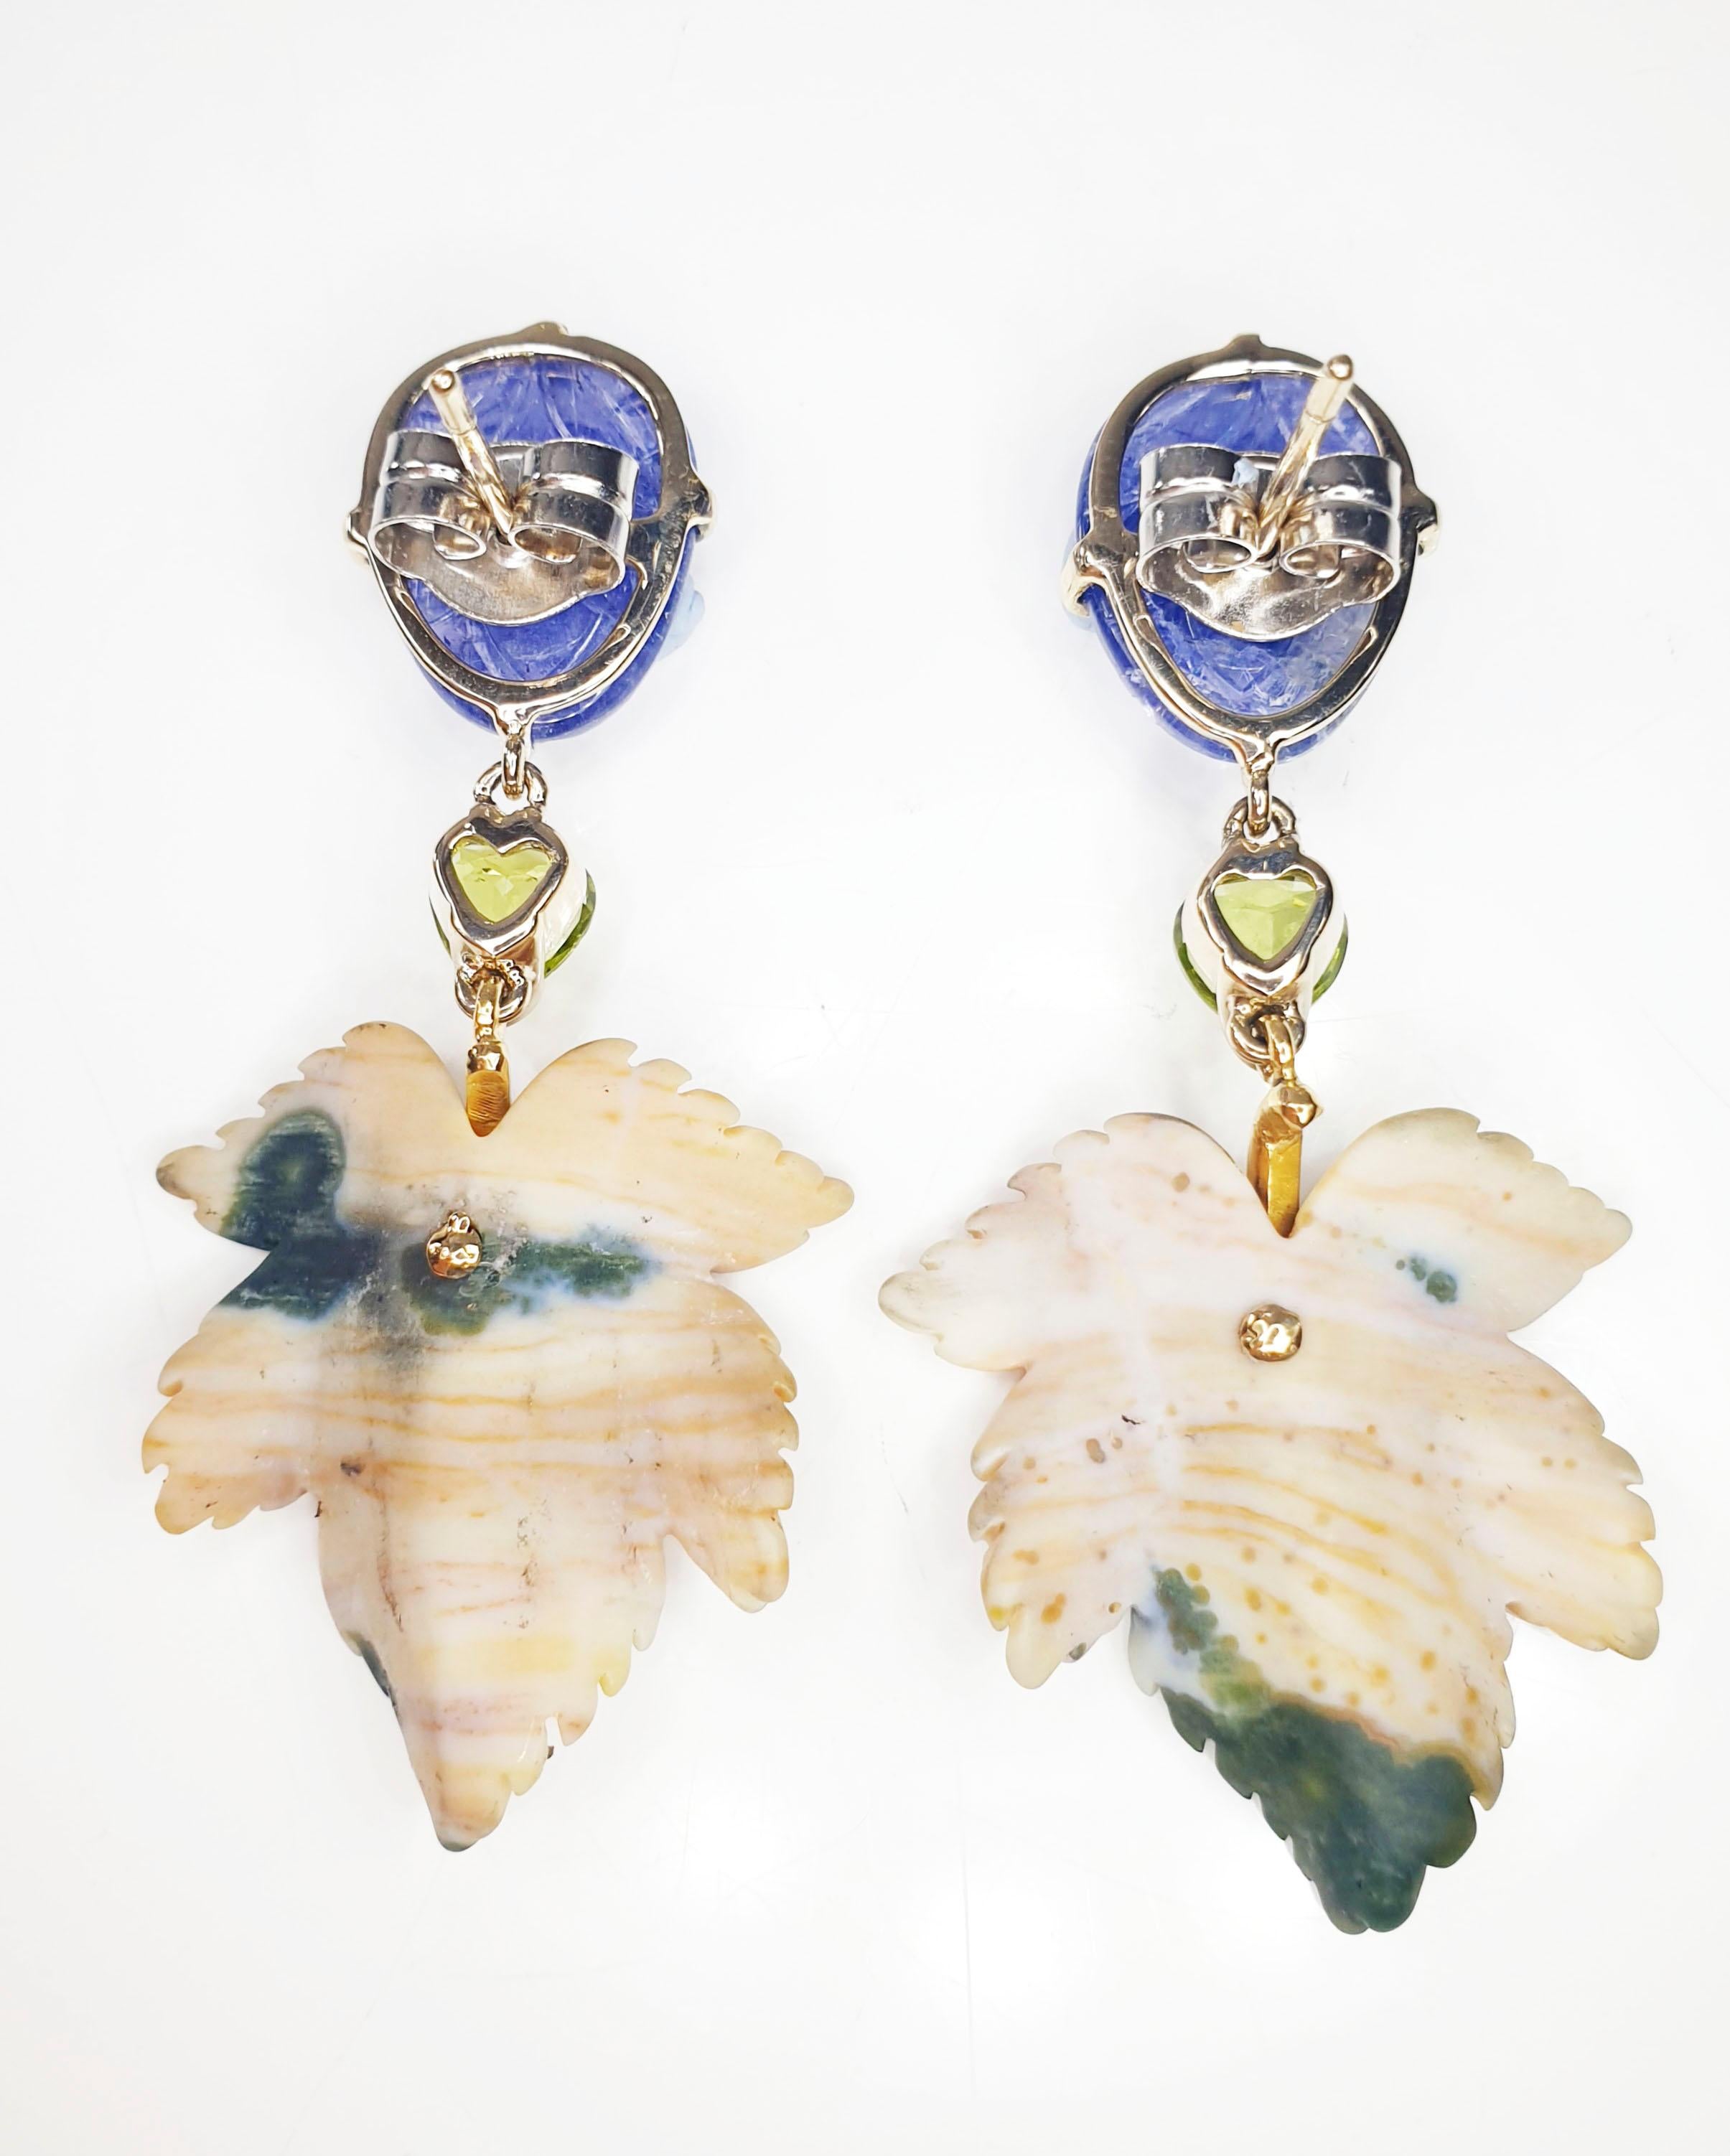 Jasper Leafs  carved tanzanites  peridote in yellow and white 18k gold drop earrings
Irama Pradera is a Young designer from Spain that searches always for the best gems and combines classic with contemporary mounting and styles. 

◘ Length 5cm /